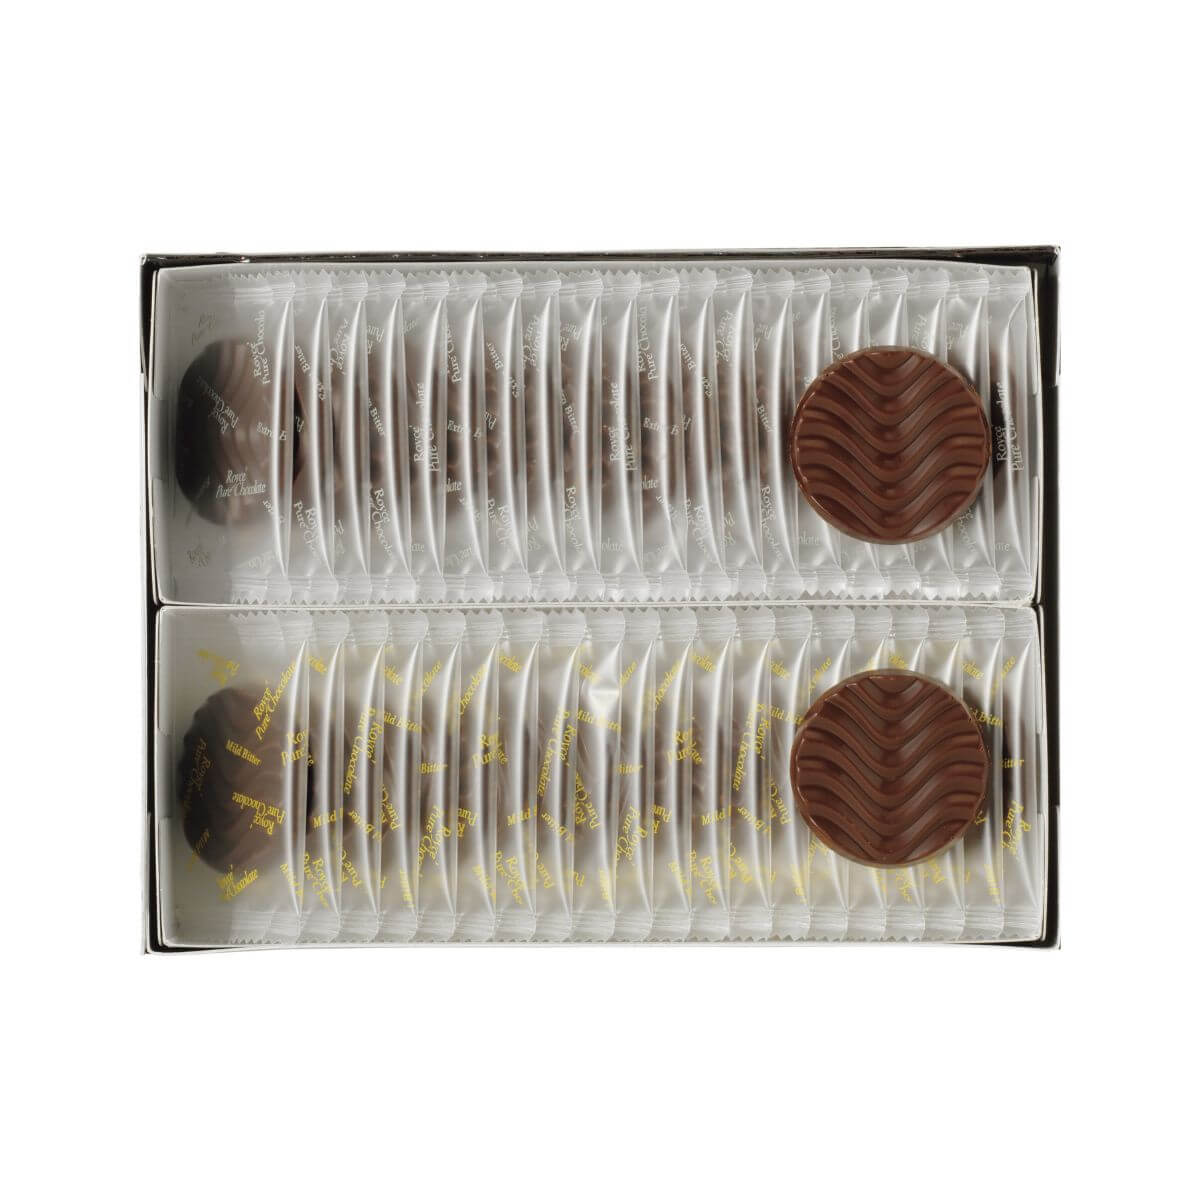 ROYCE' Chocolate - Pure Chocolate "Mild Bitter & Extra Bitter" - Image shows a box filled with individually-wrapped dark chocolates.